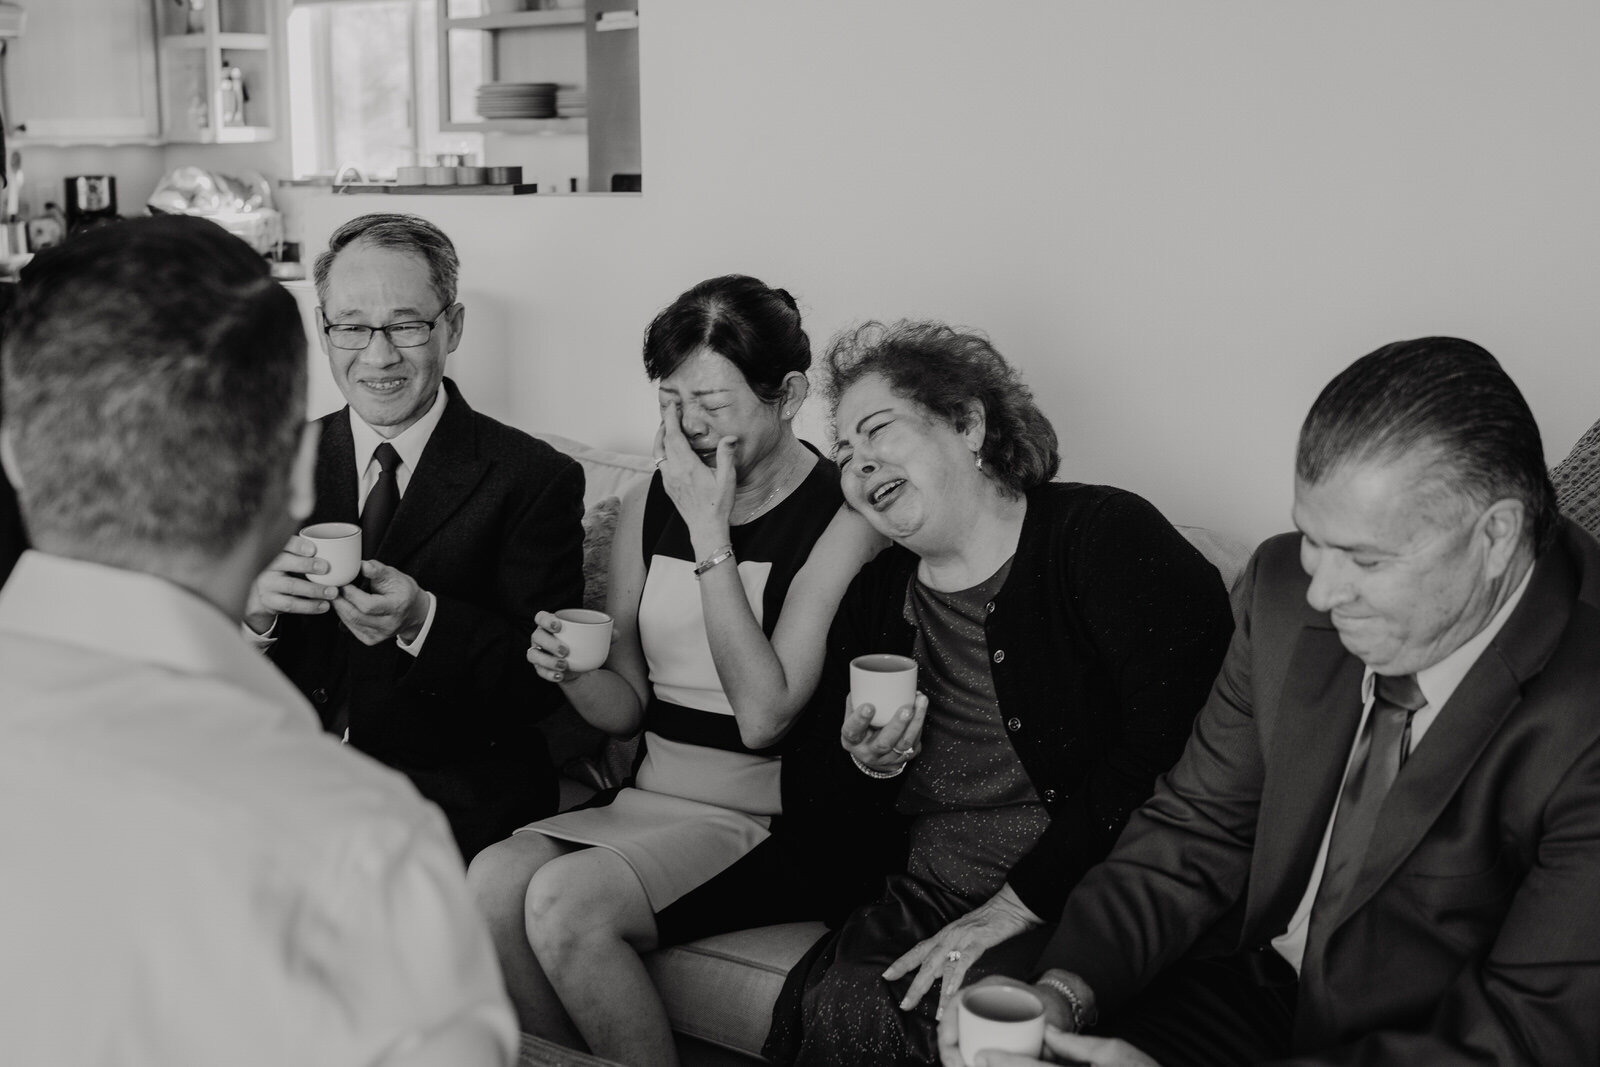 Mothers Crying at Chinese Tea Ceremony in Black and White Photo at Joshua Tree Wedding